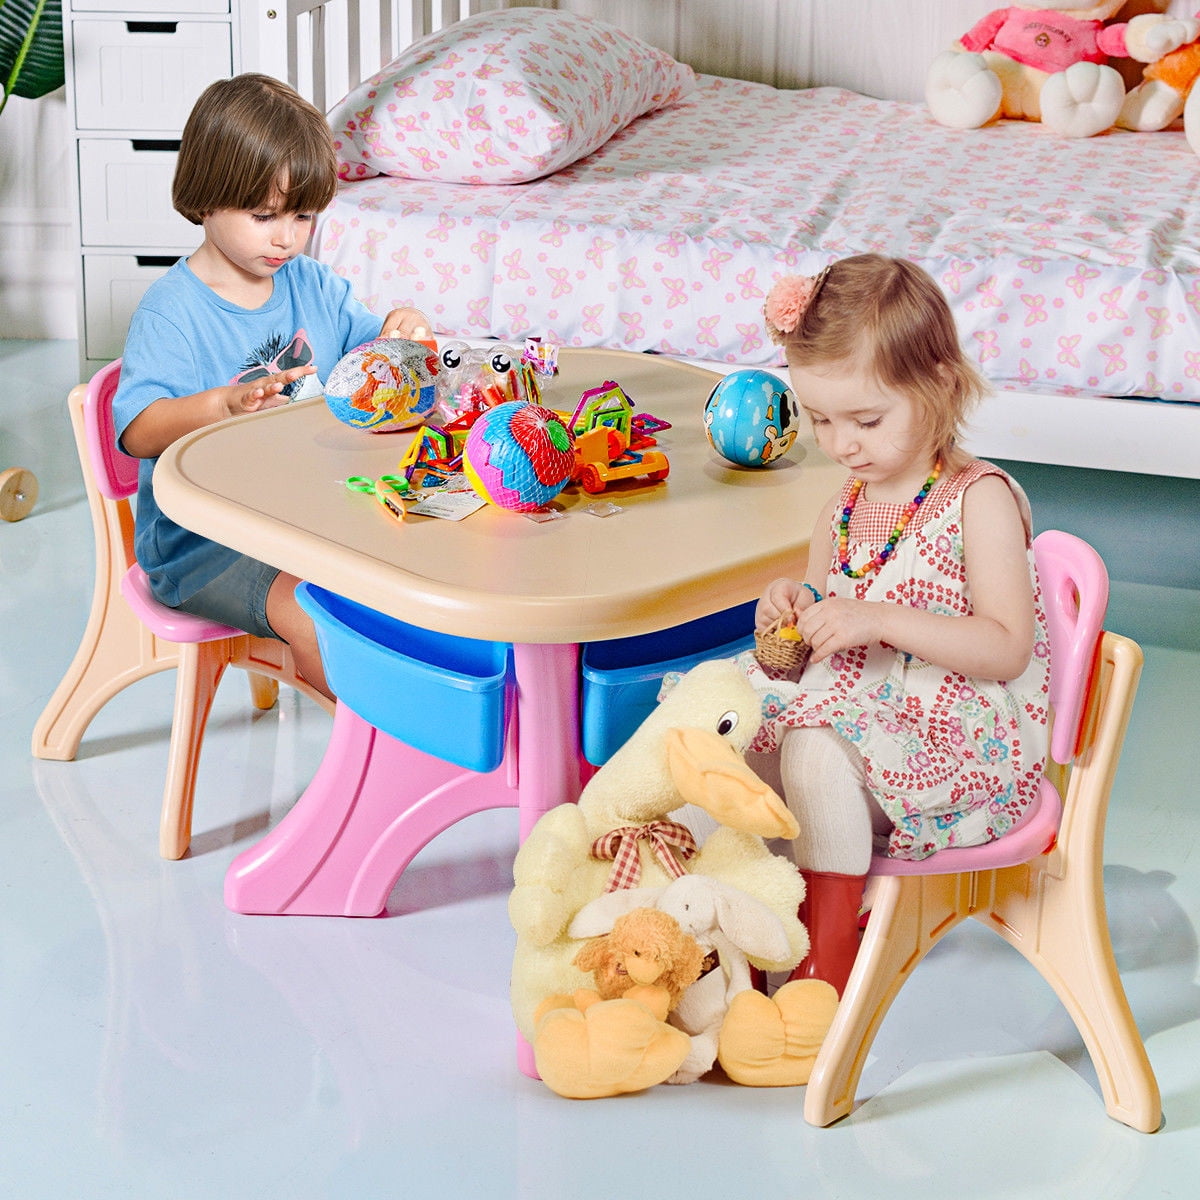 table and chairs for kids walmart